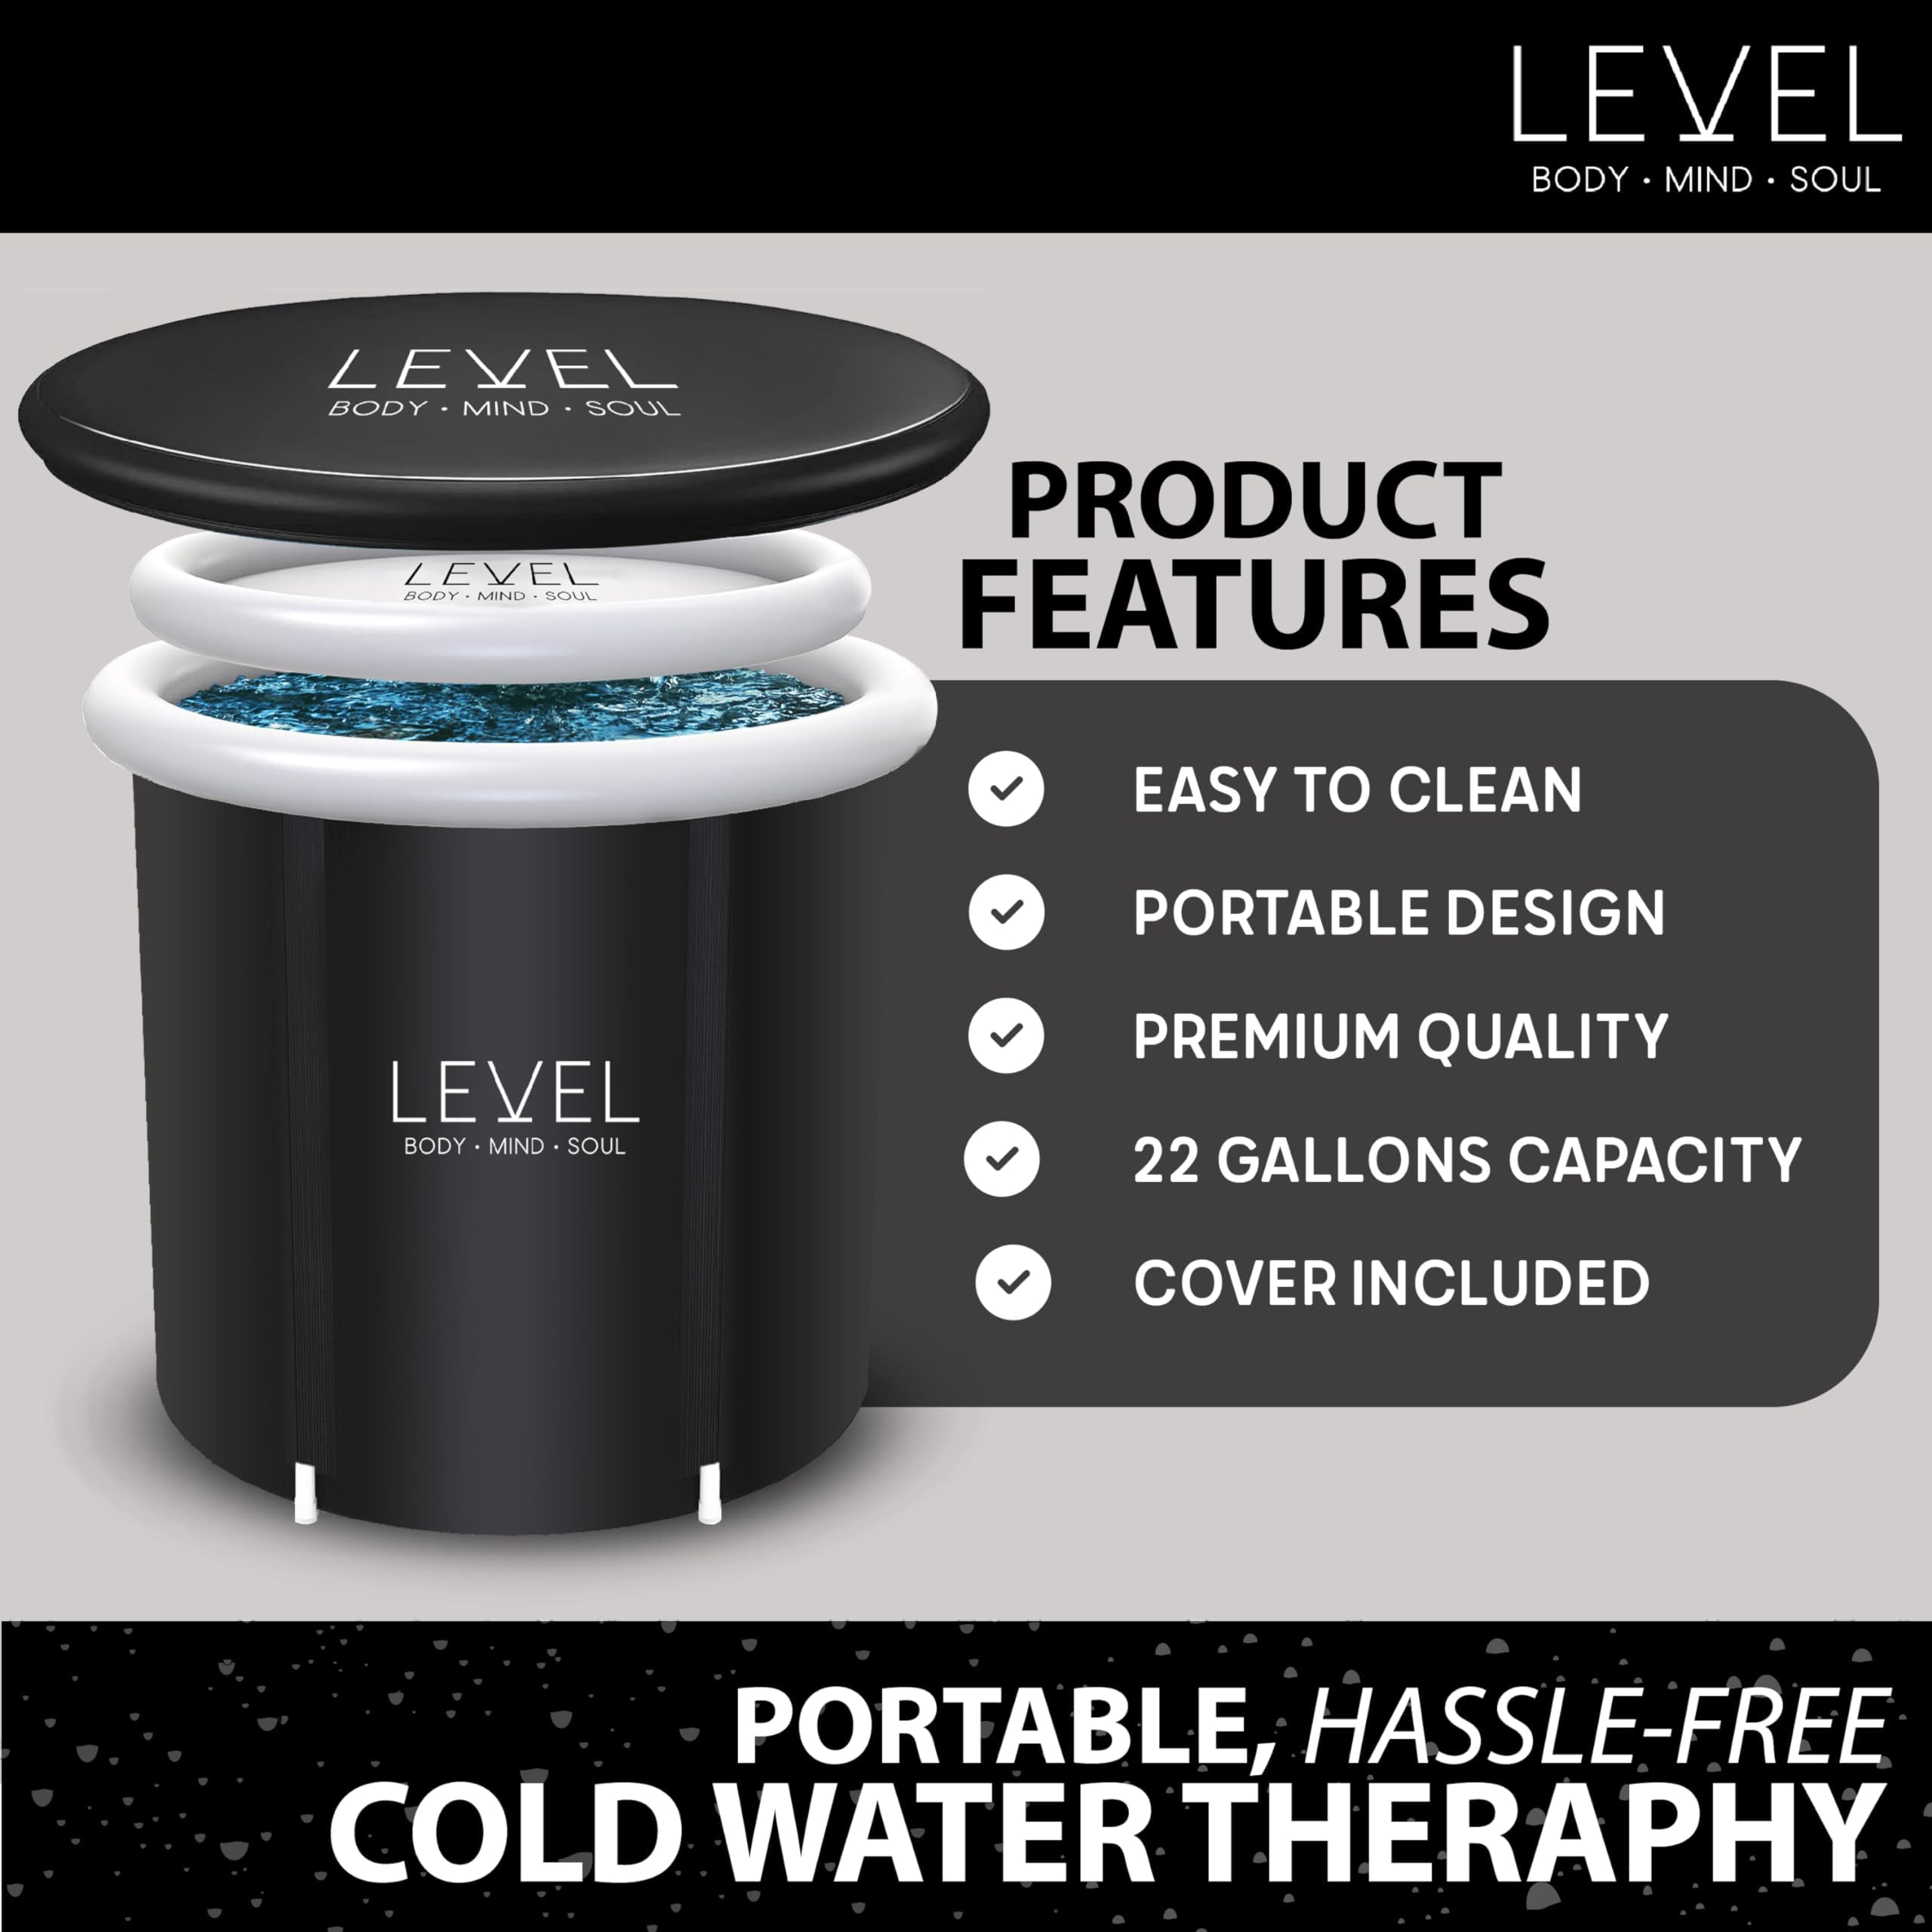 Level Body Mind Soul - Portable Ice Bath with Cover included - Ice Bath for athletes, post-workout recovery Cold Therapy - Can help improve Sleep and your general Wellbeing - 29x29 Inches